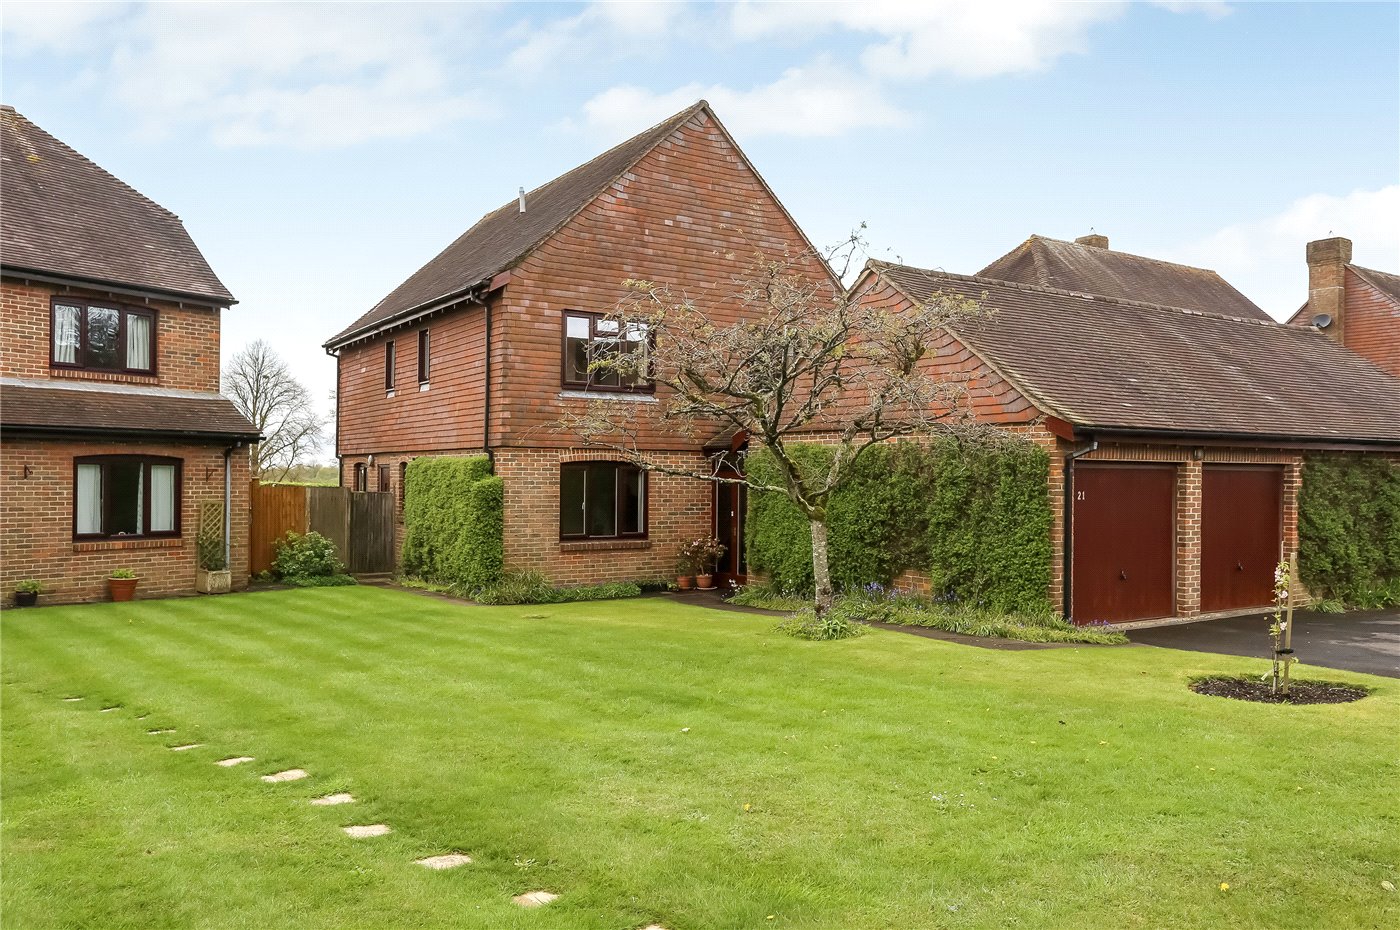 Fairfax Close, Winchester, Hampshire, SO22 4 bedroom house in Winchester